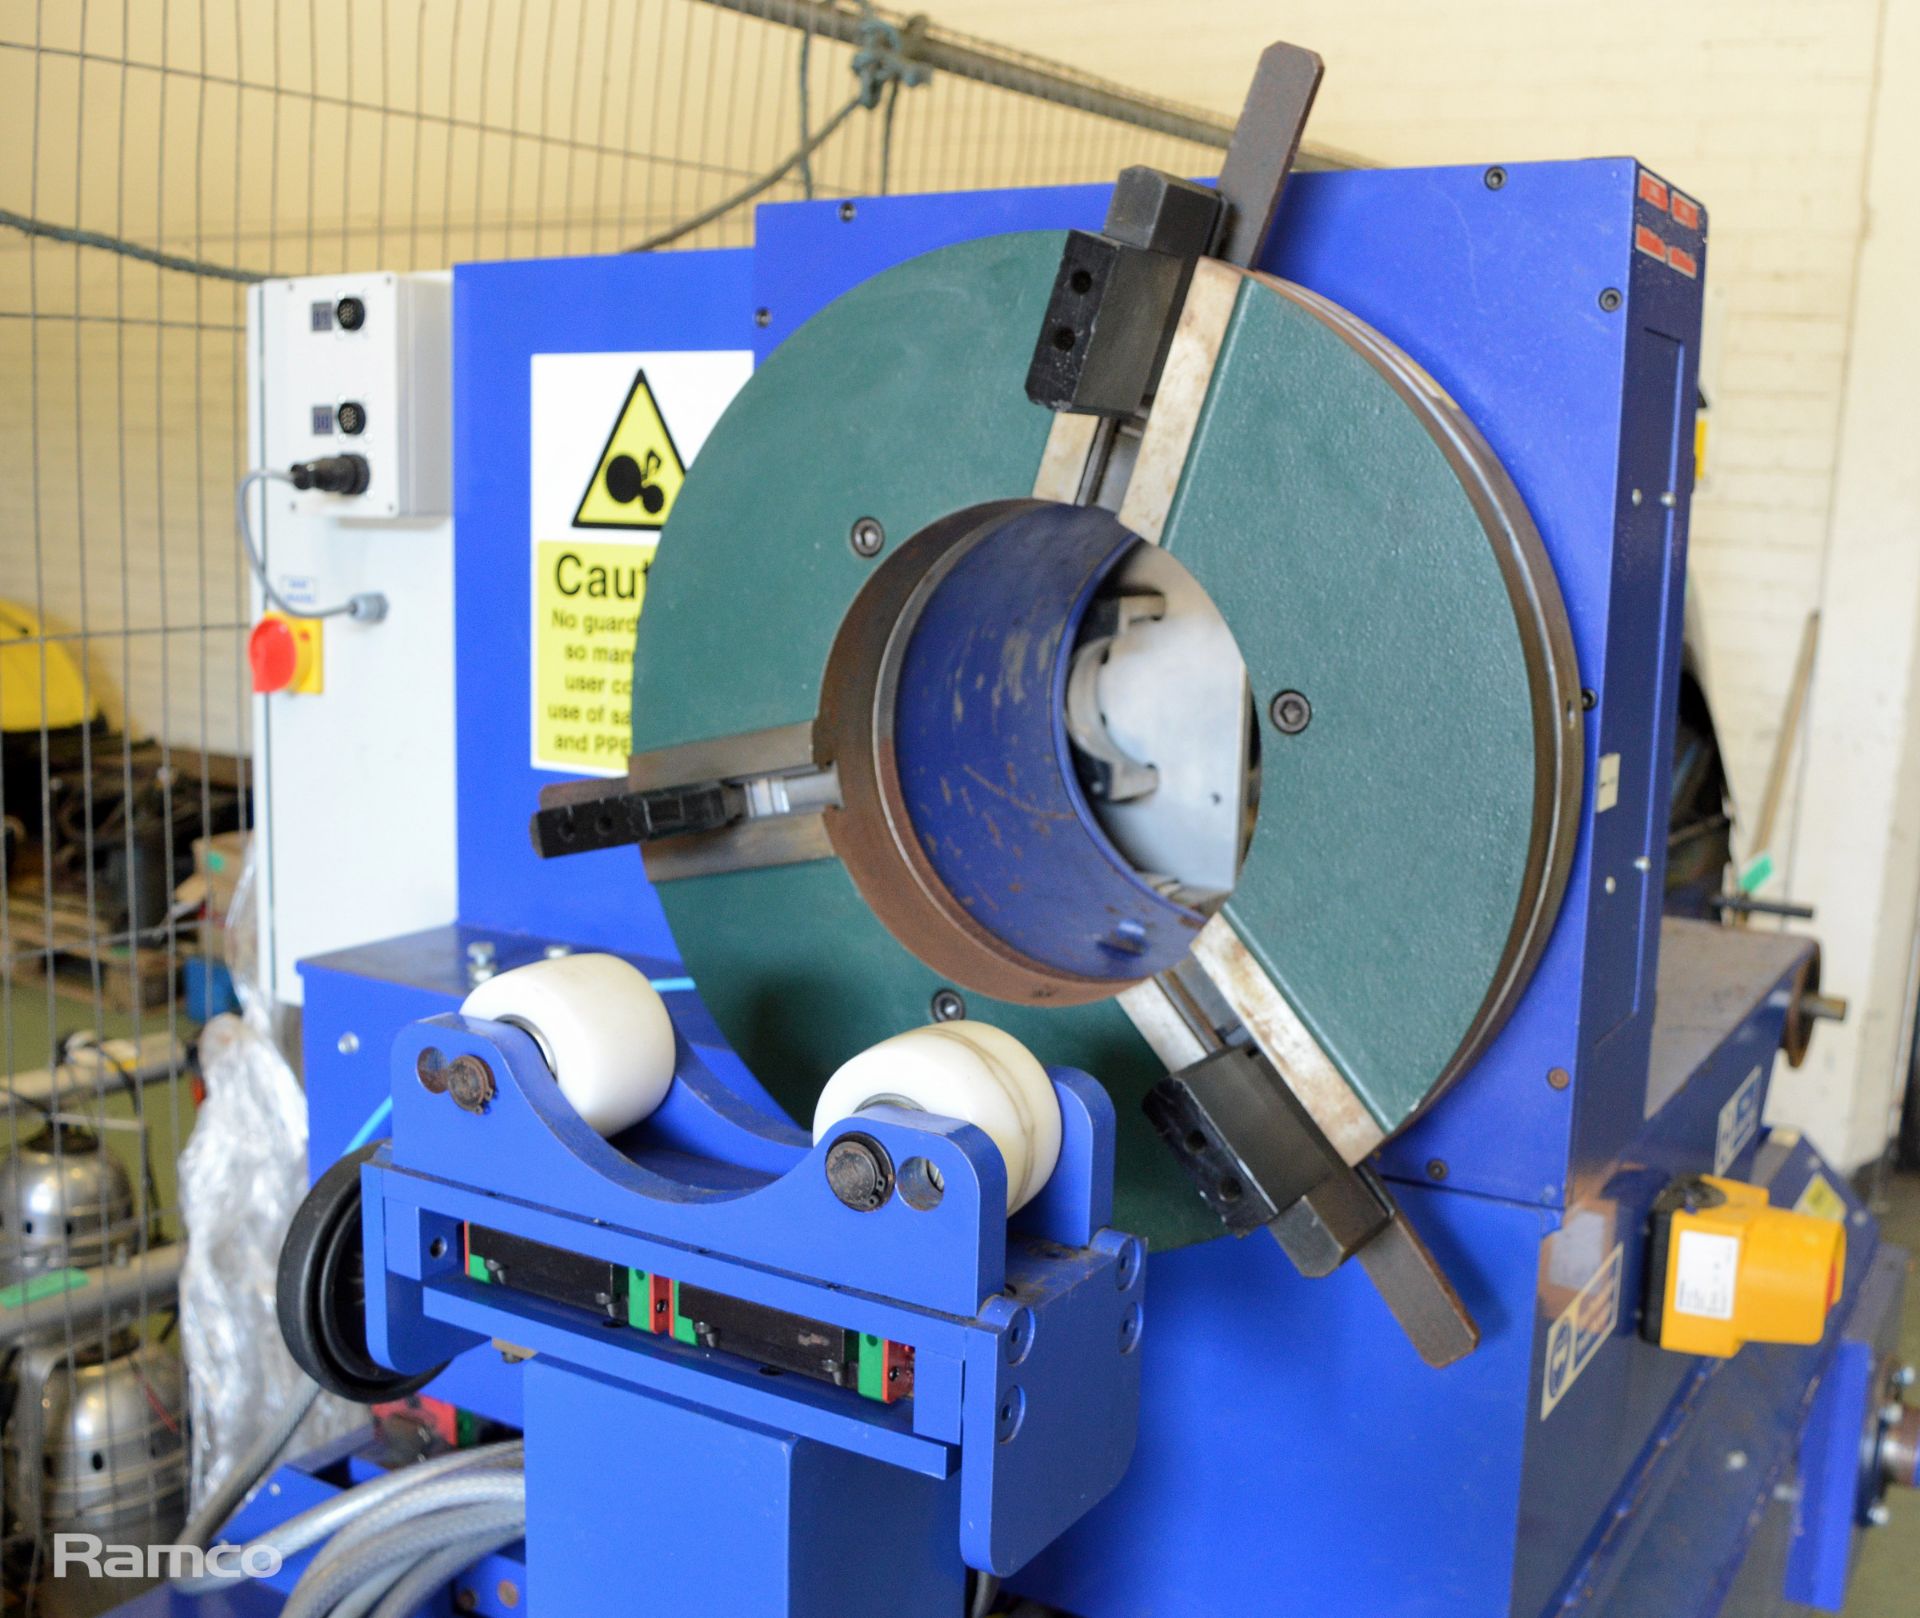 VBC manufactured IE300i welding lathe with spares package - no computer/control panel (as pictured) - Image 14 of 42